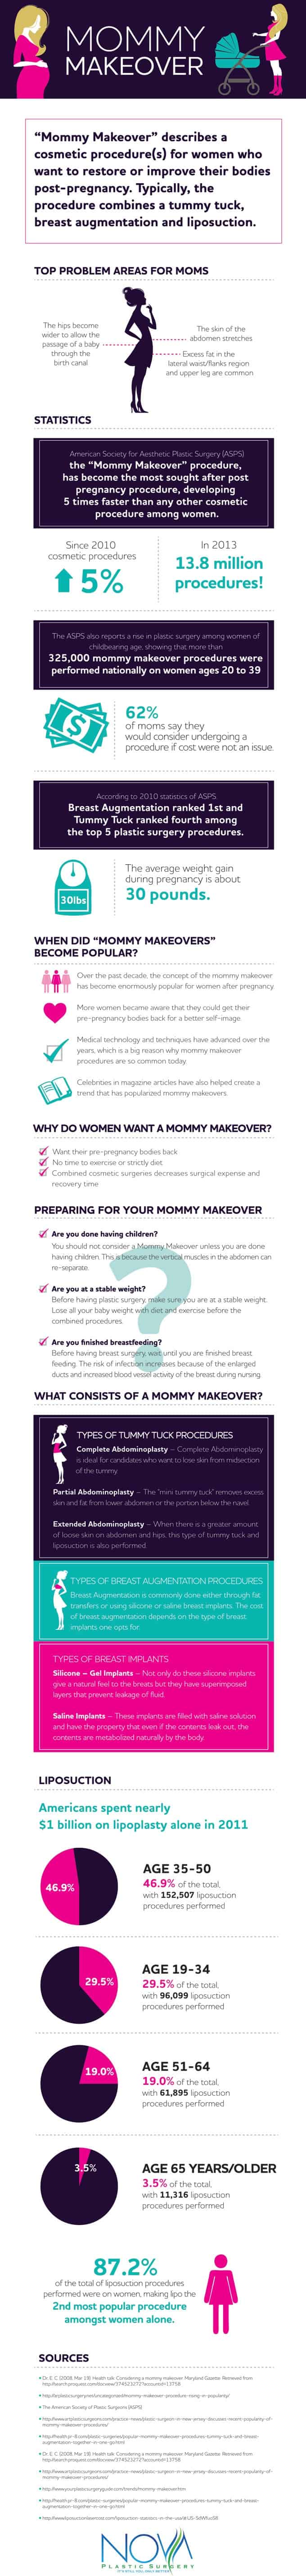 Mommy makeover infographic from NOVA Plastic Surgery in Northern Virginia